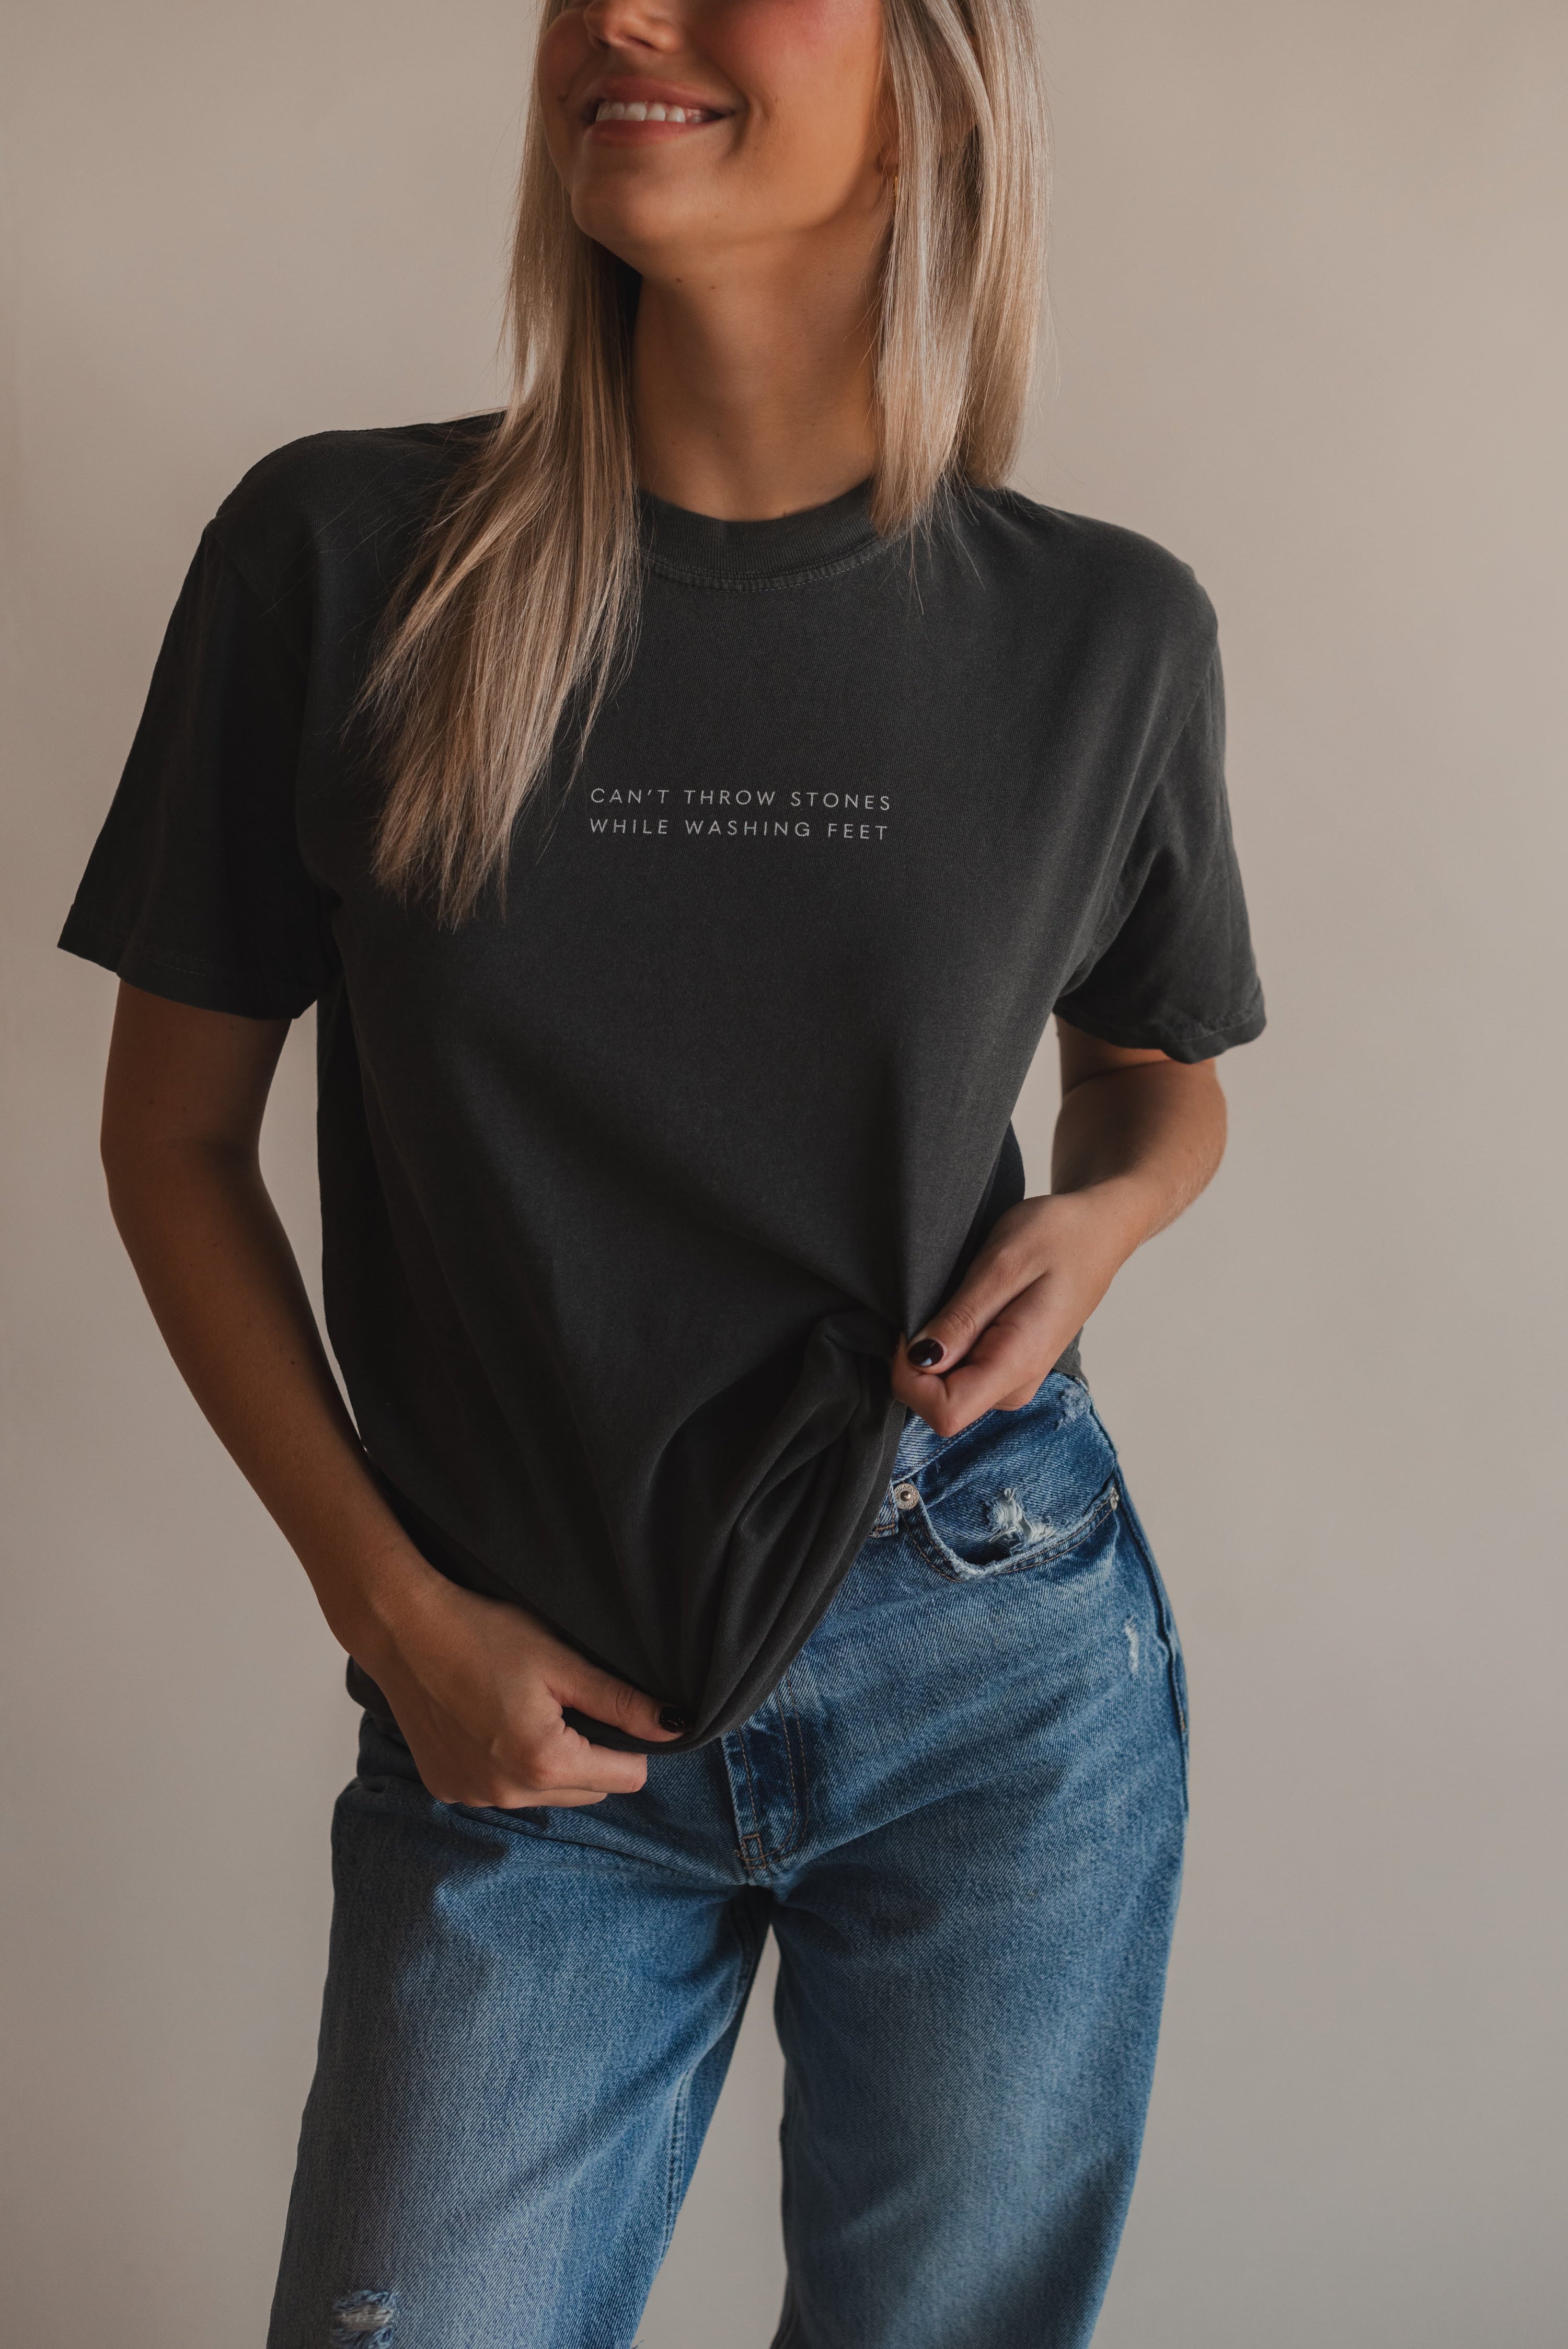 Can't Throw Stones Tee- Charcoal